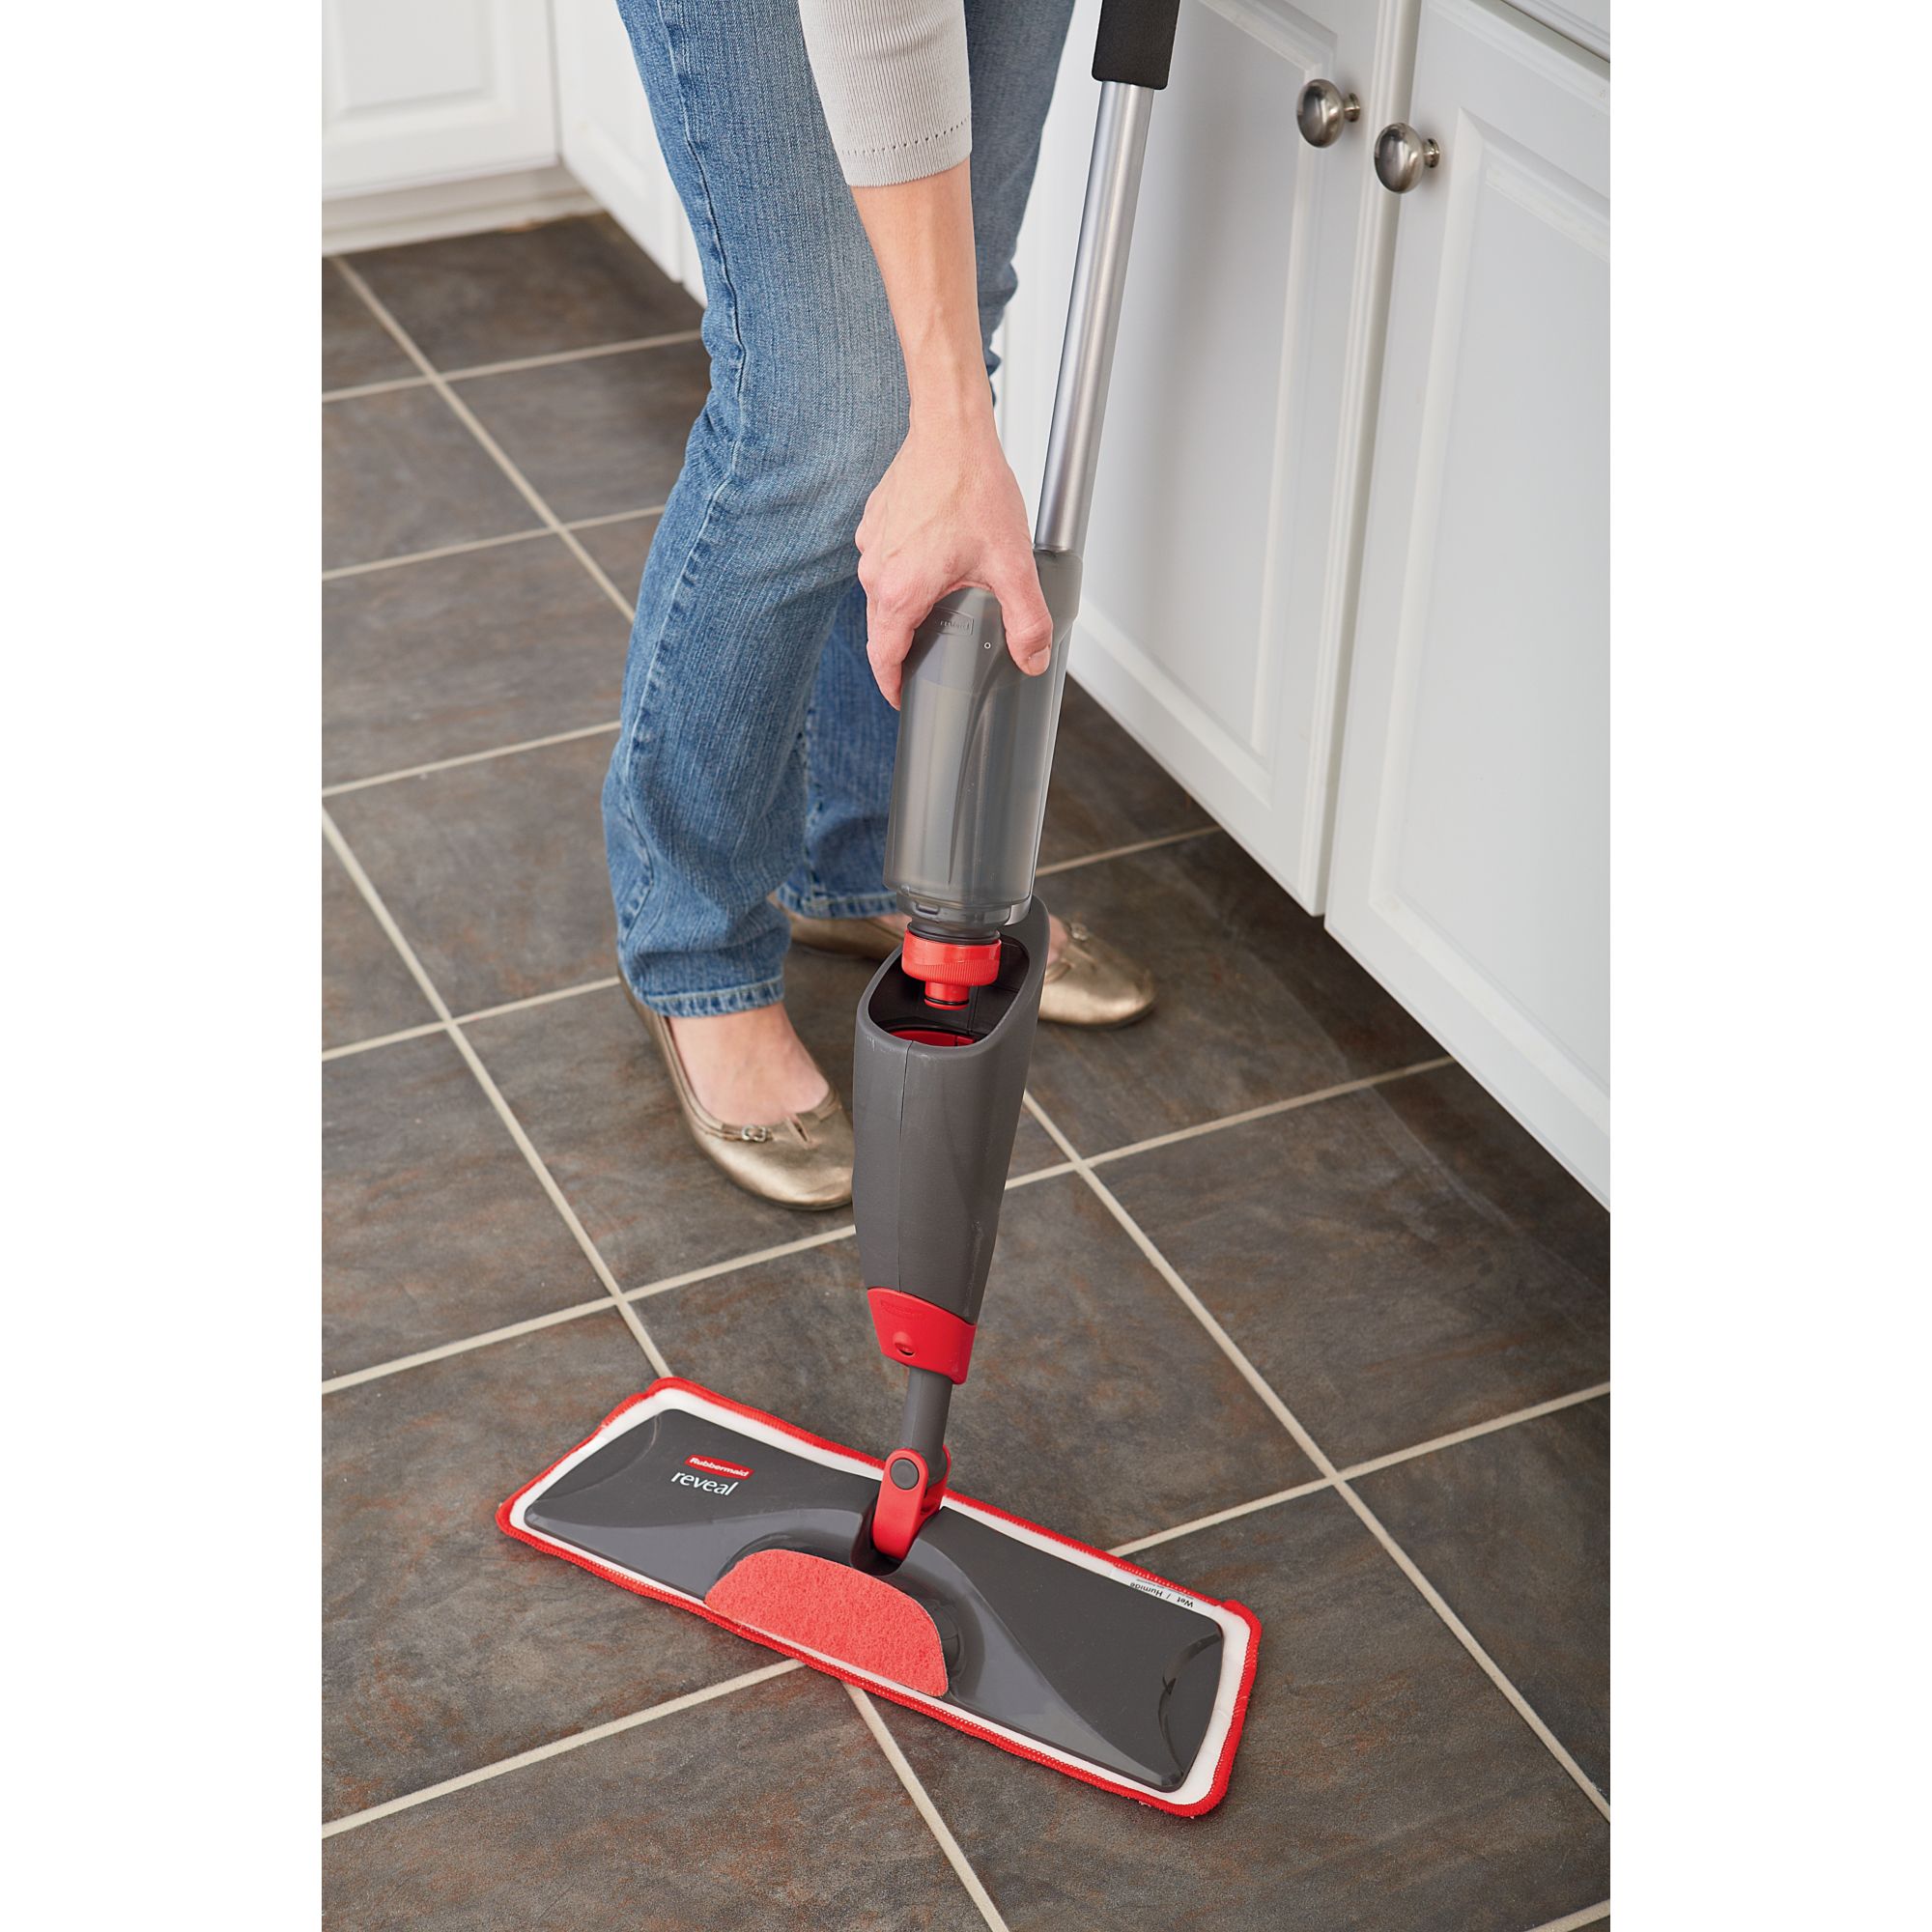  Rubbermaid Microfiber Reveal Spray Mop Floor Cleaning Kit with  3 Microfiber Wet Pads, 1 Solution Refillable Bottles for Wet & Dry Use,  Washable & Reusable Pads, Cordless, for All Floor Types 